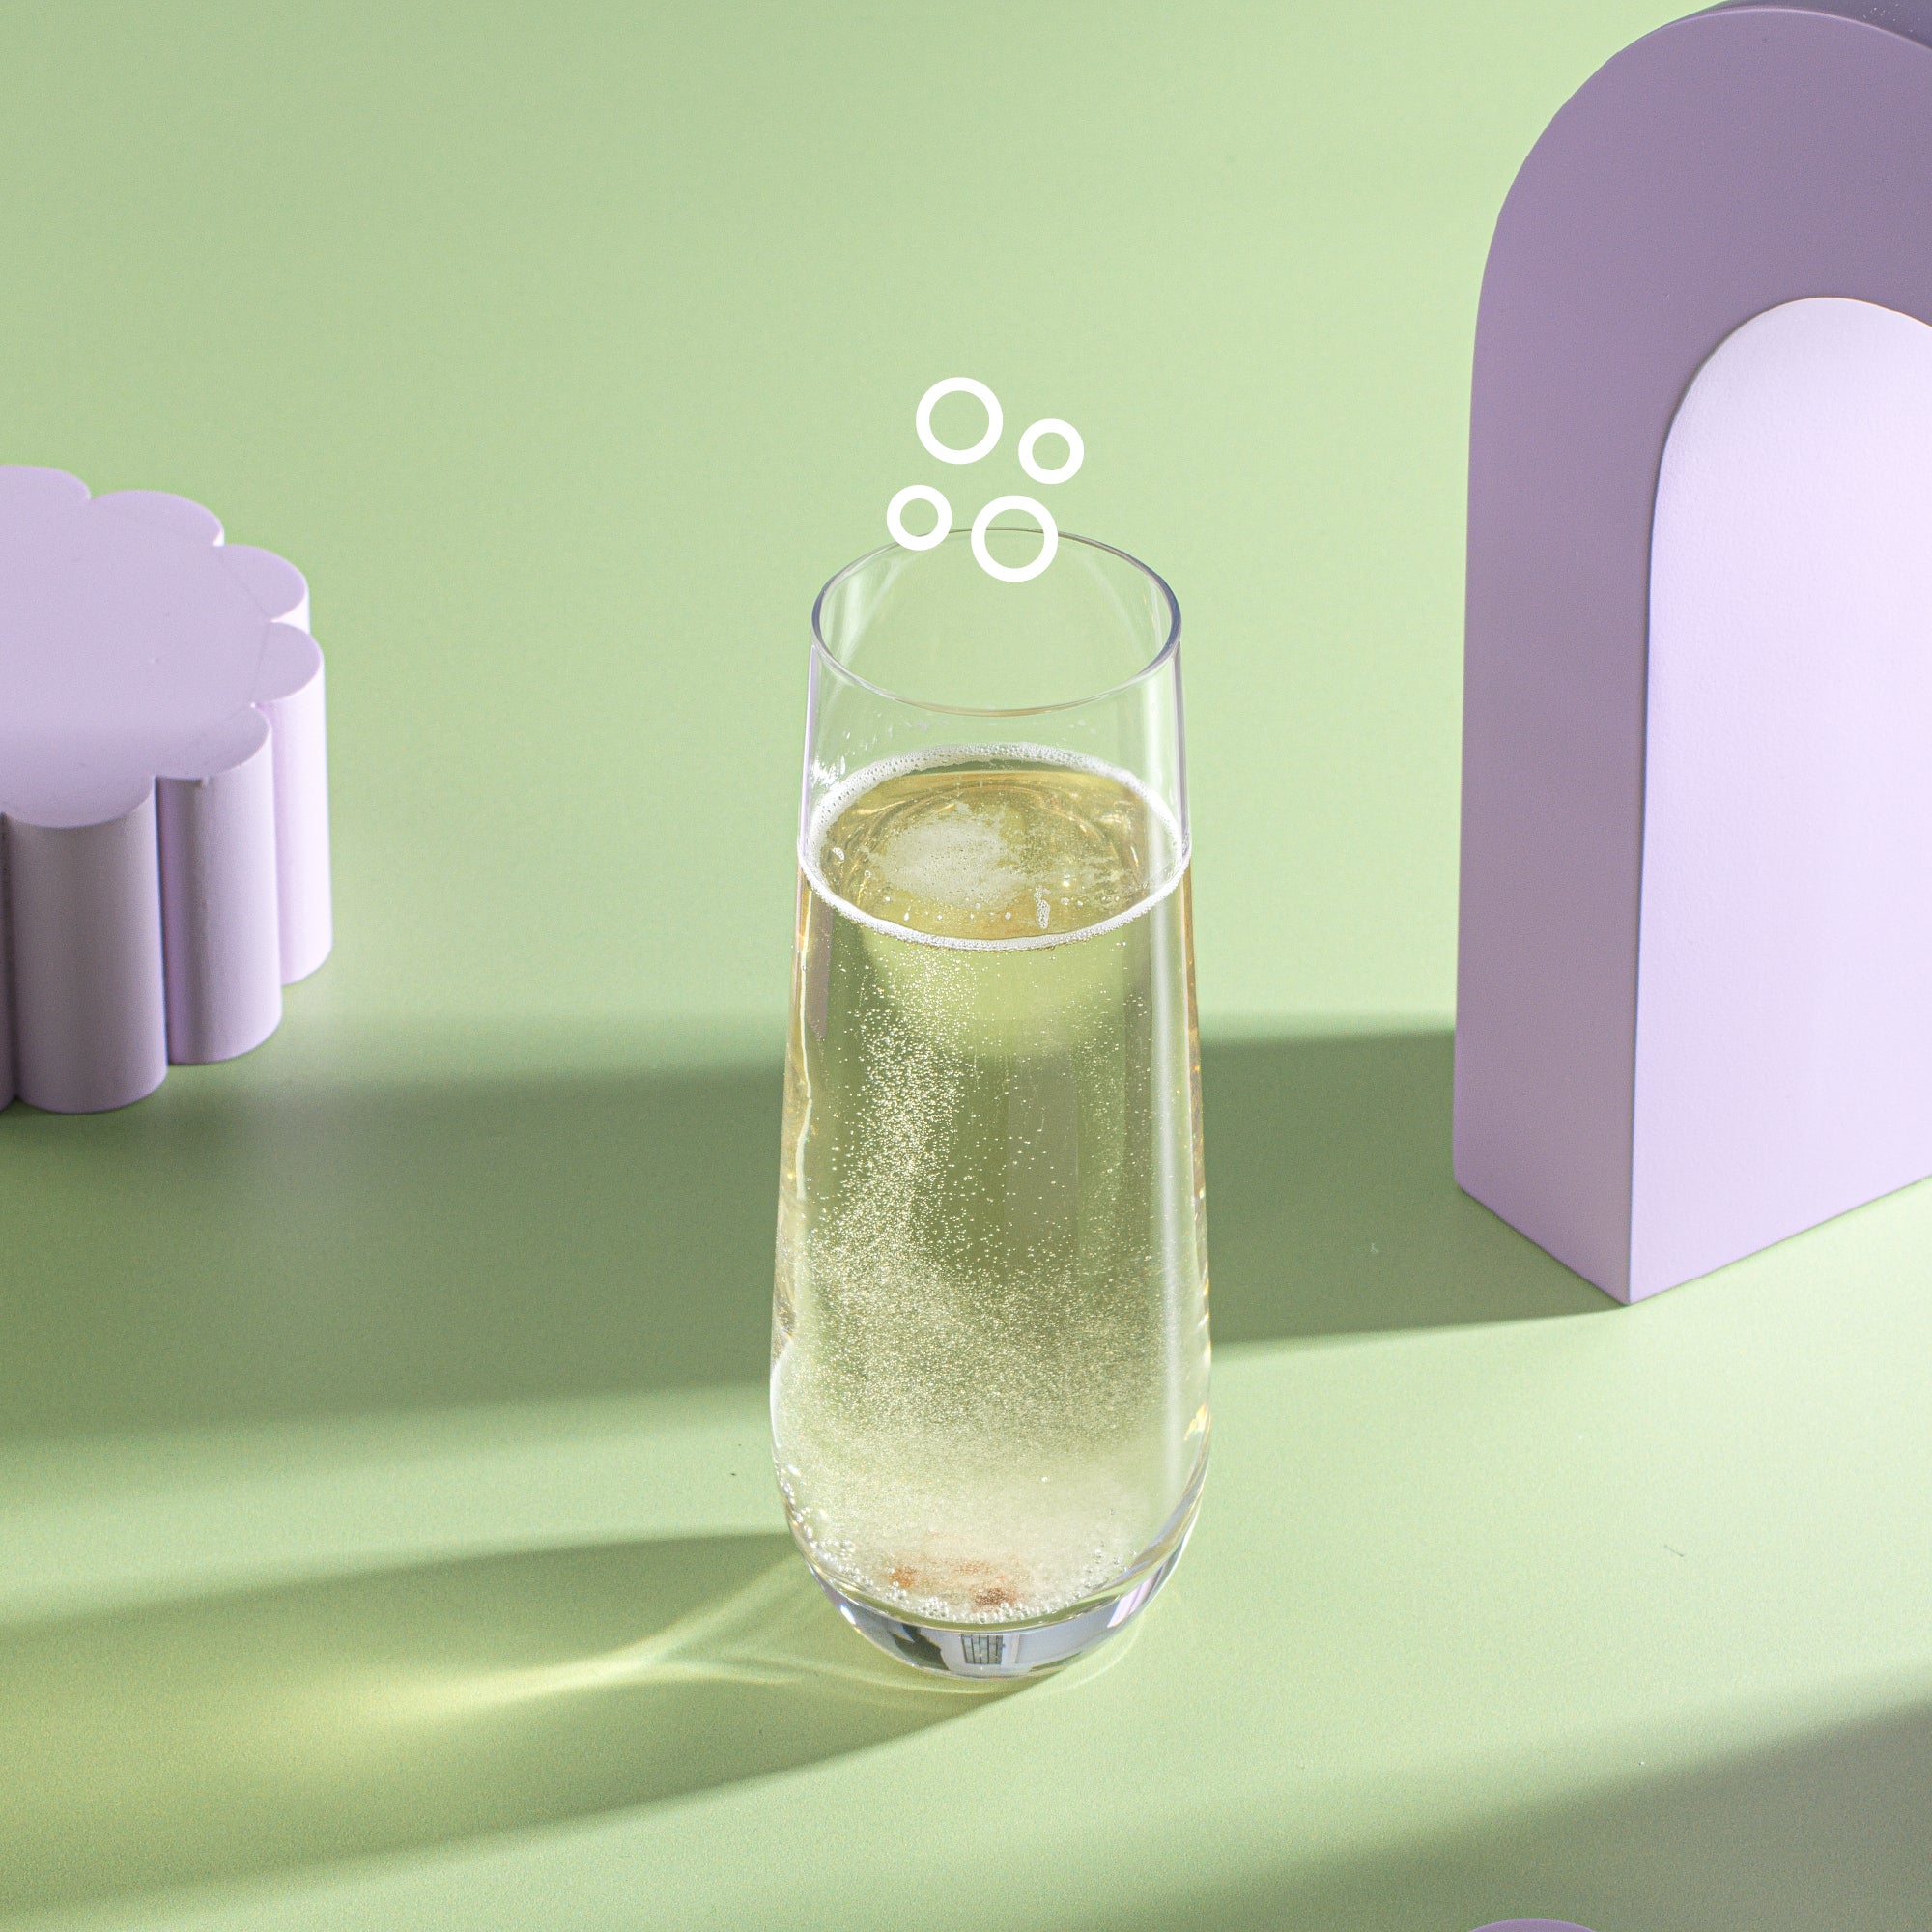 A Milo Champagne Glass on a green surface. There are two abstract shapes, both purple in the background. 